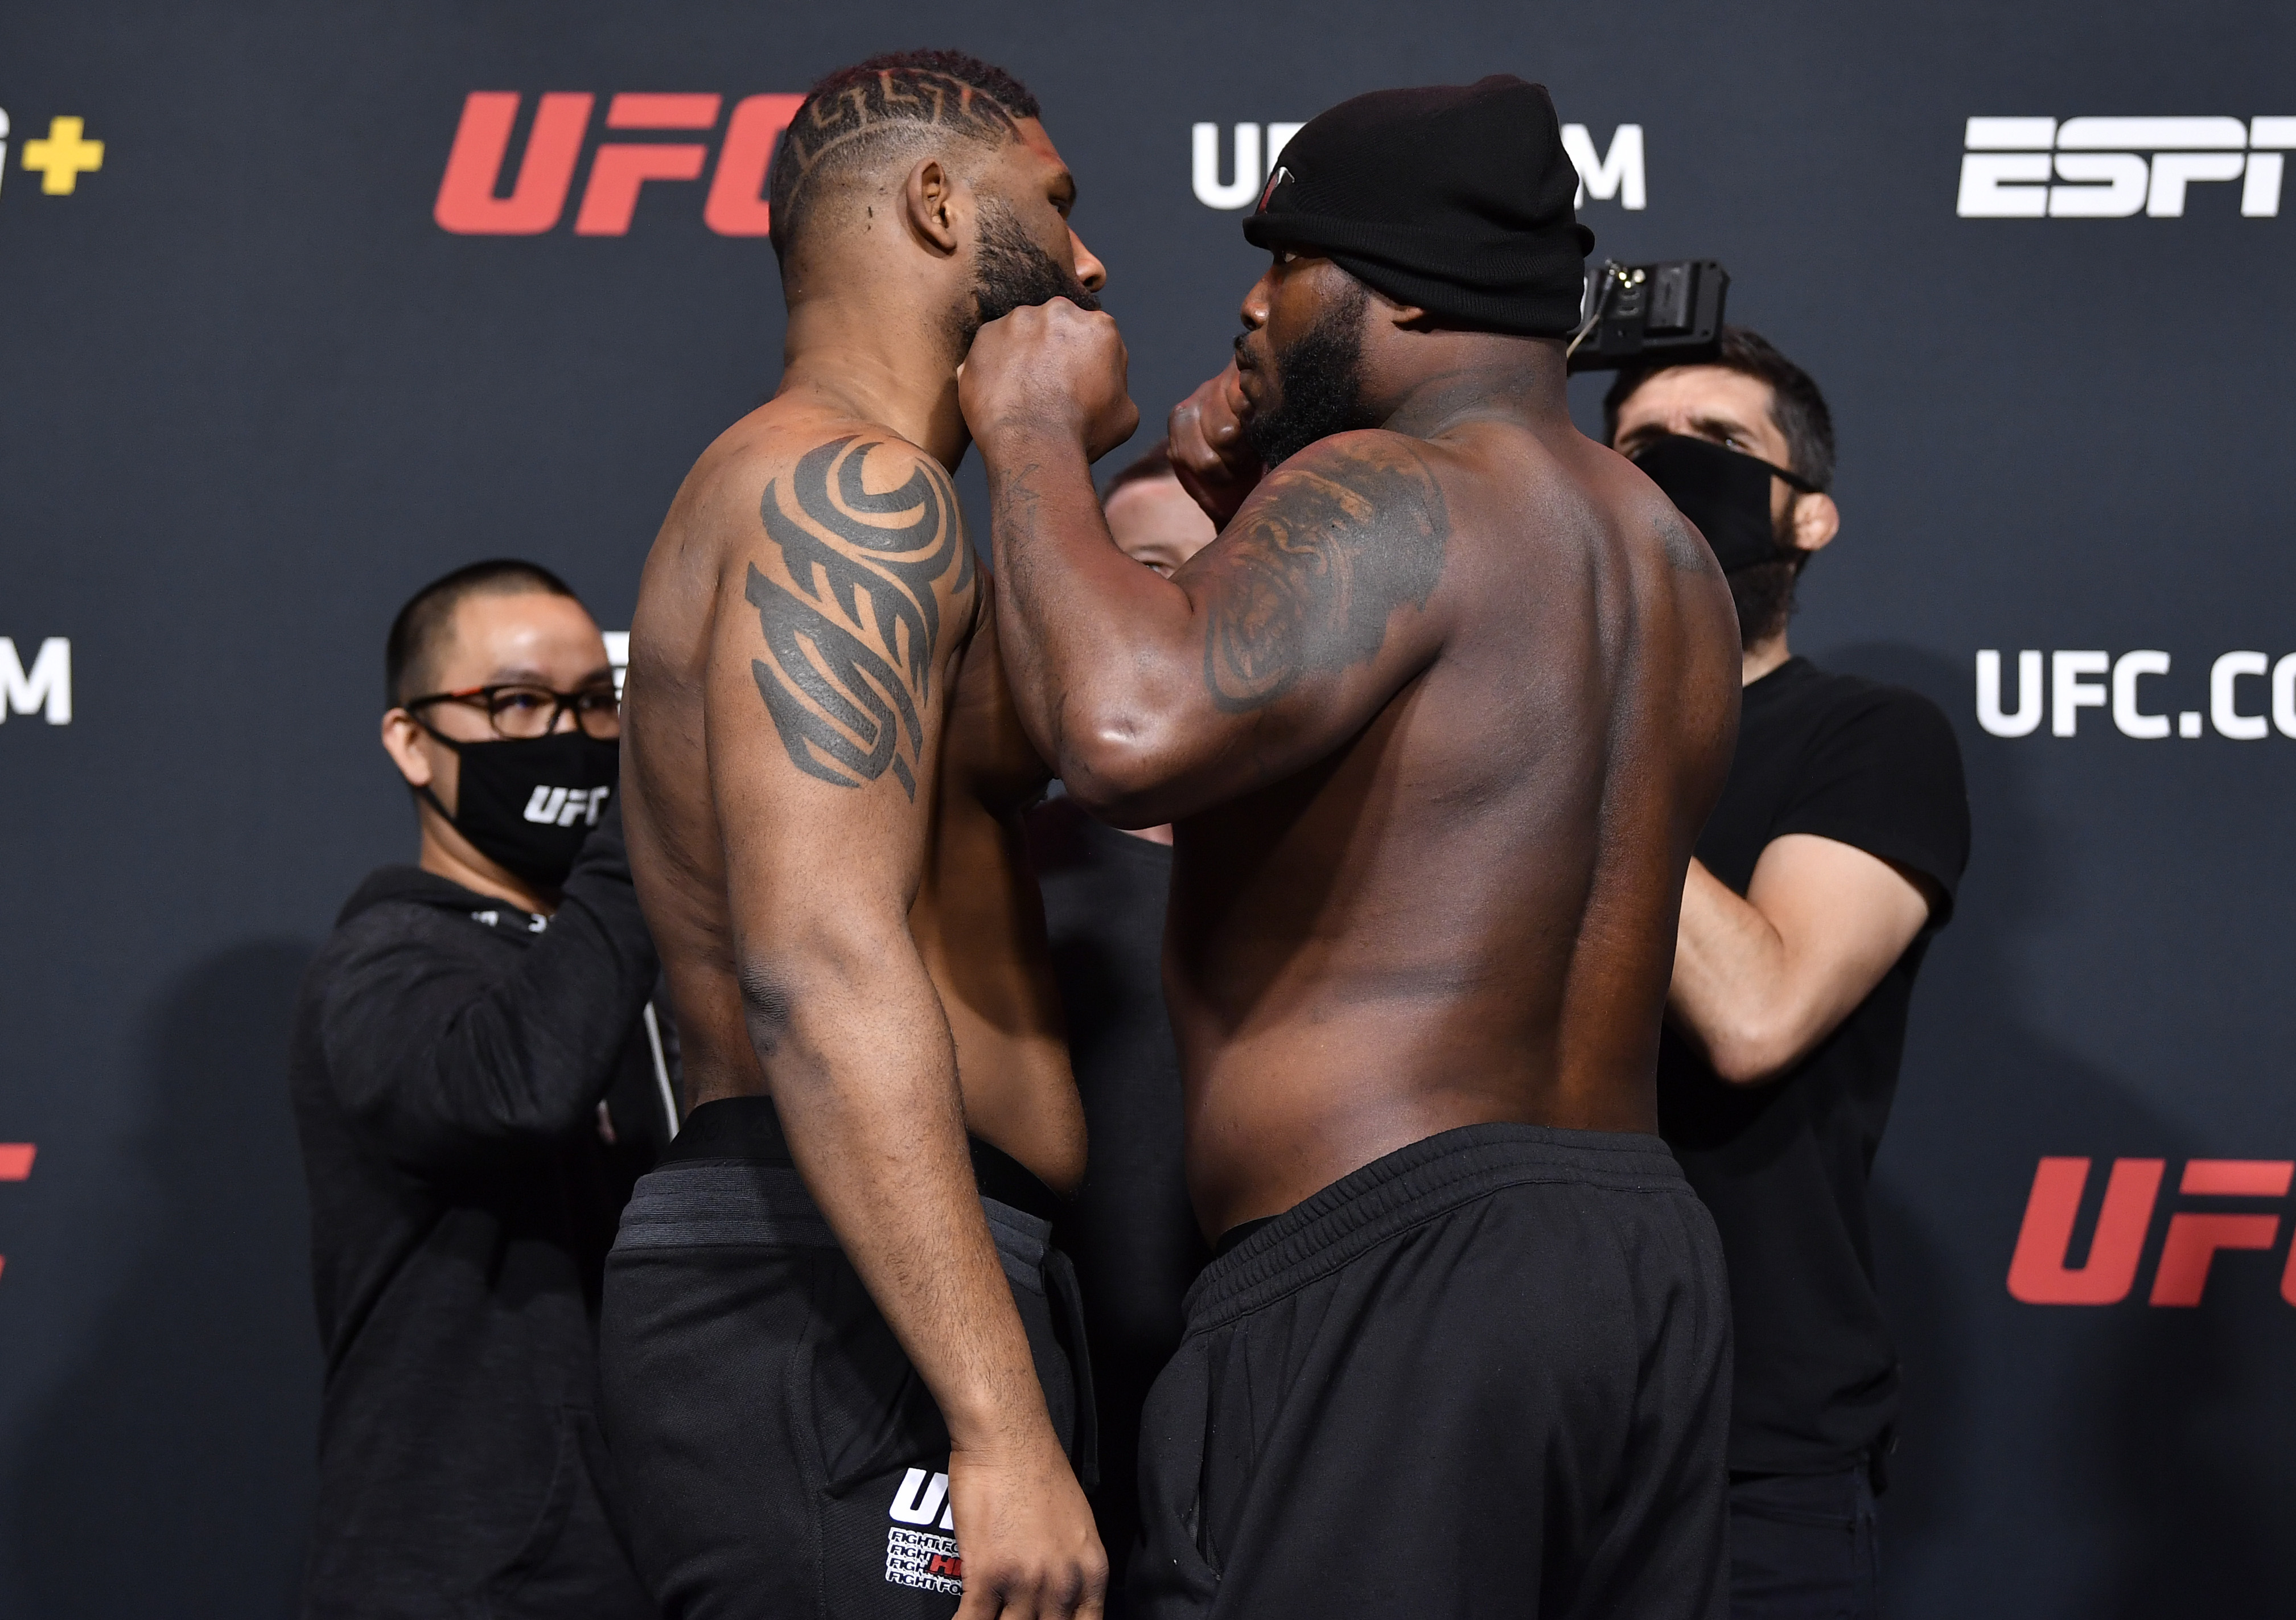 UFC star Derrick Lewis says 'I need a s***' on live TV following knockout  win over Aleksei Oleinik